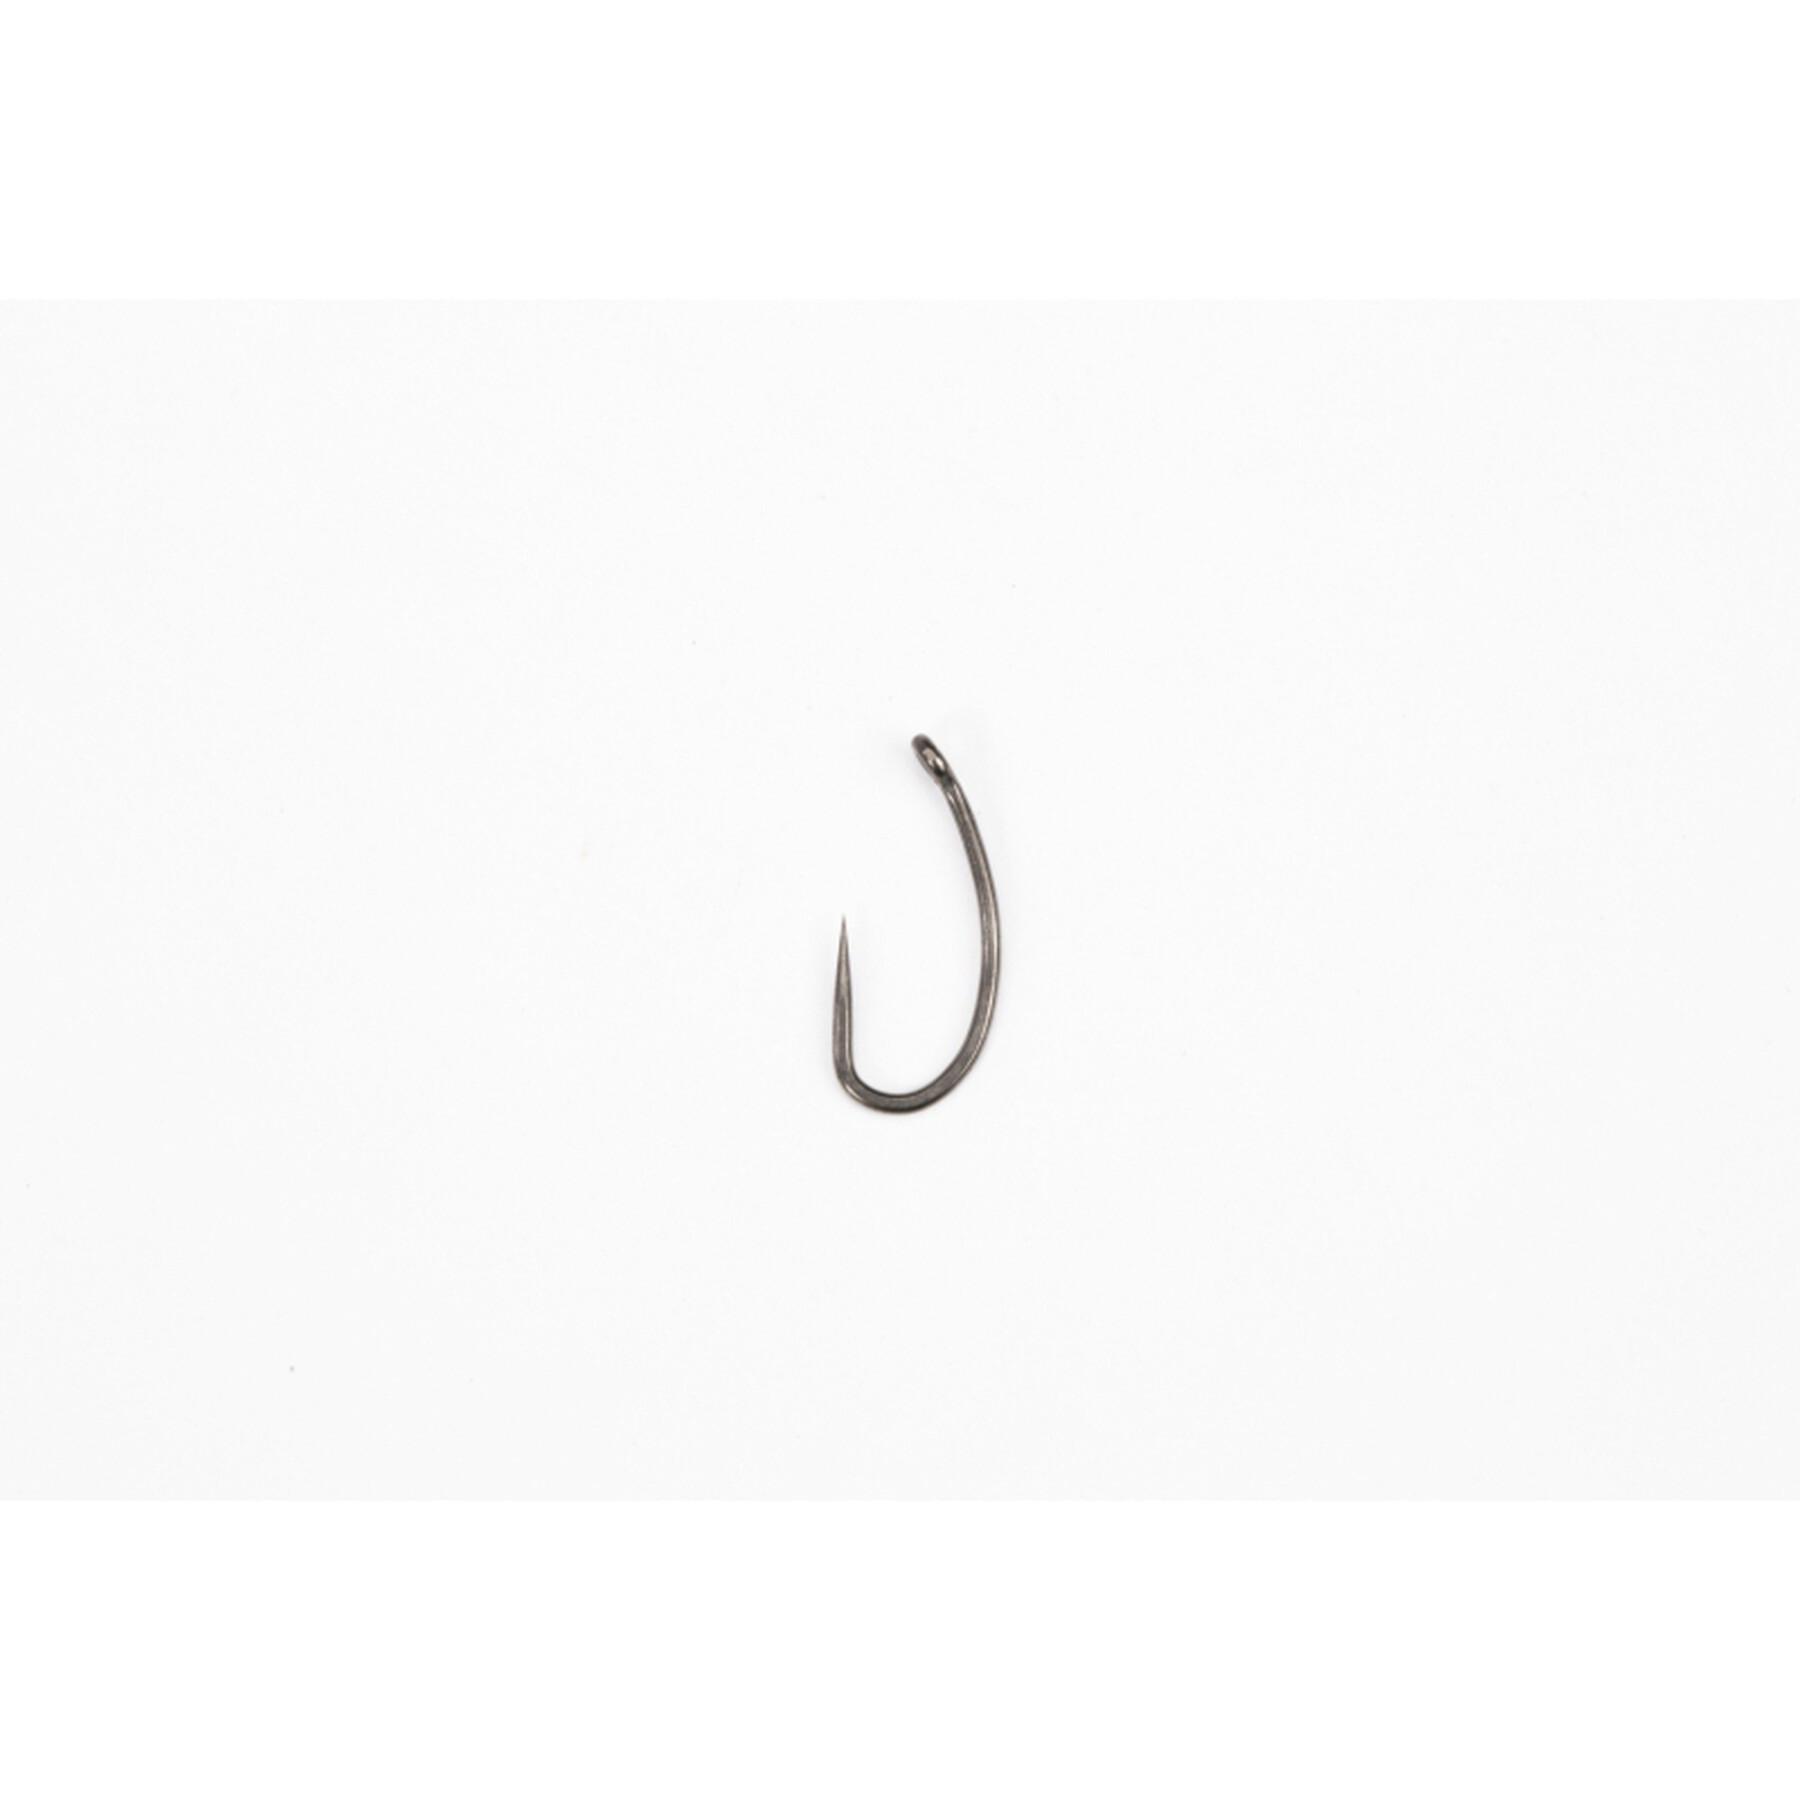 Hook Pinpoint Fang X size 4 without swivel